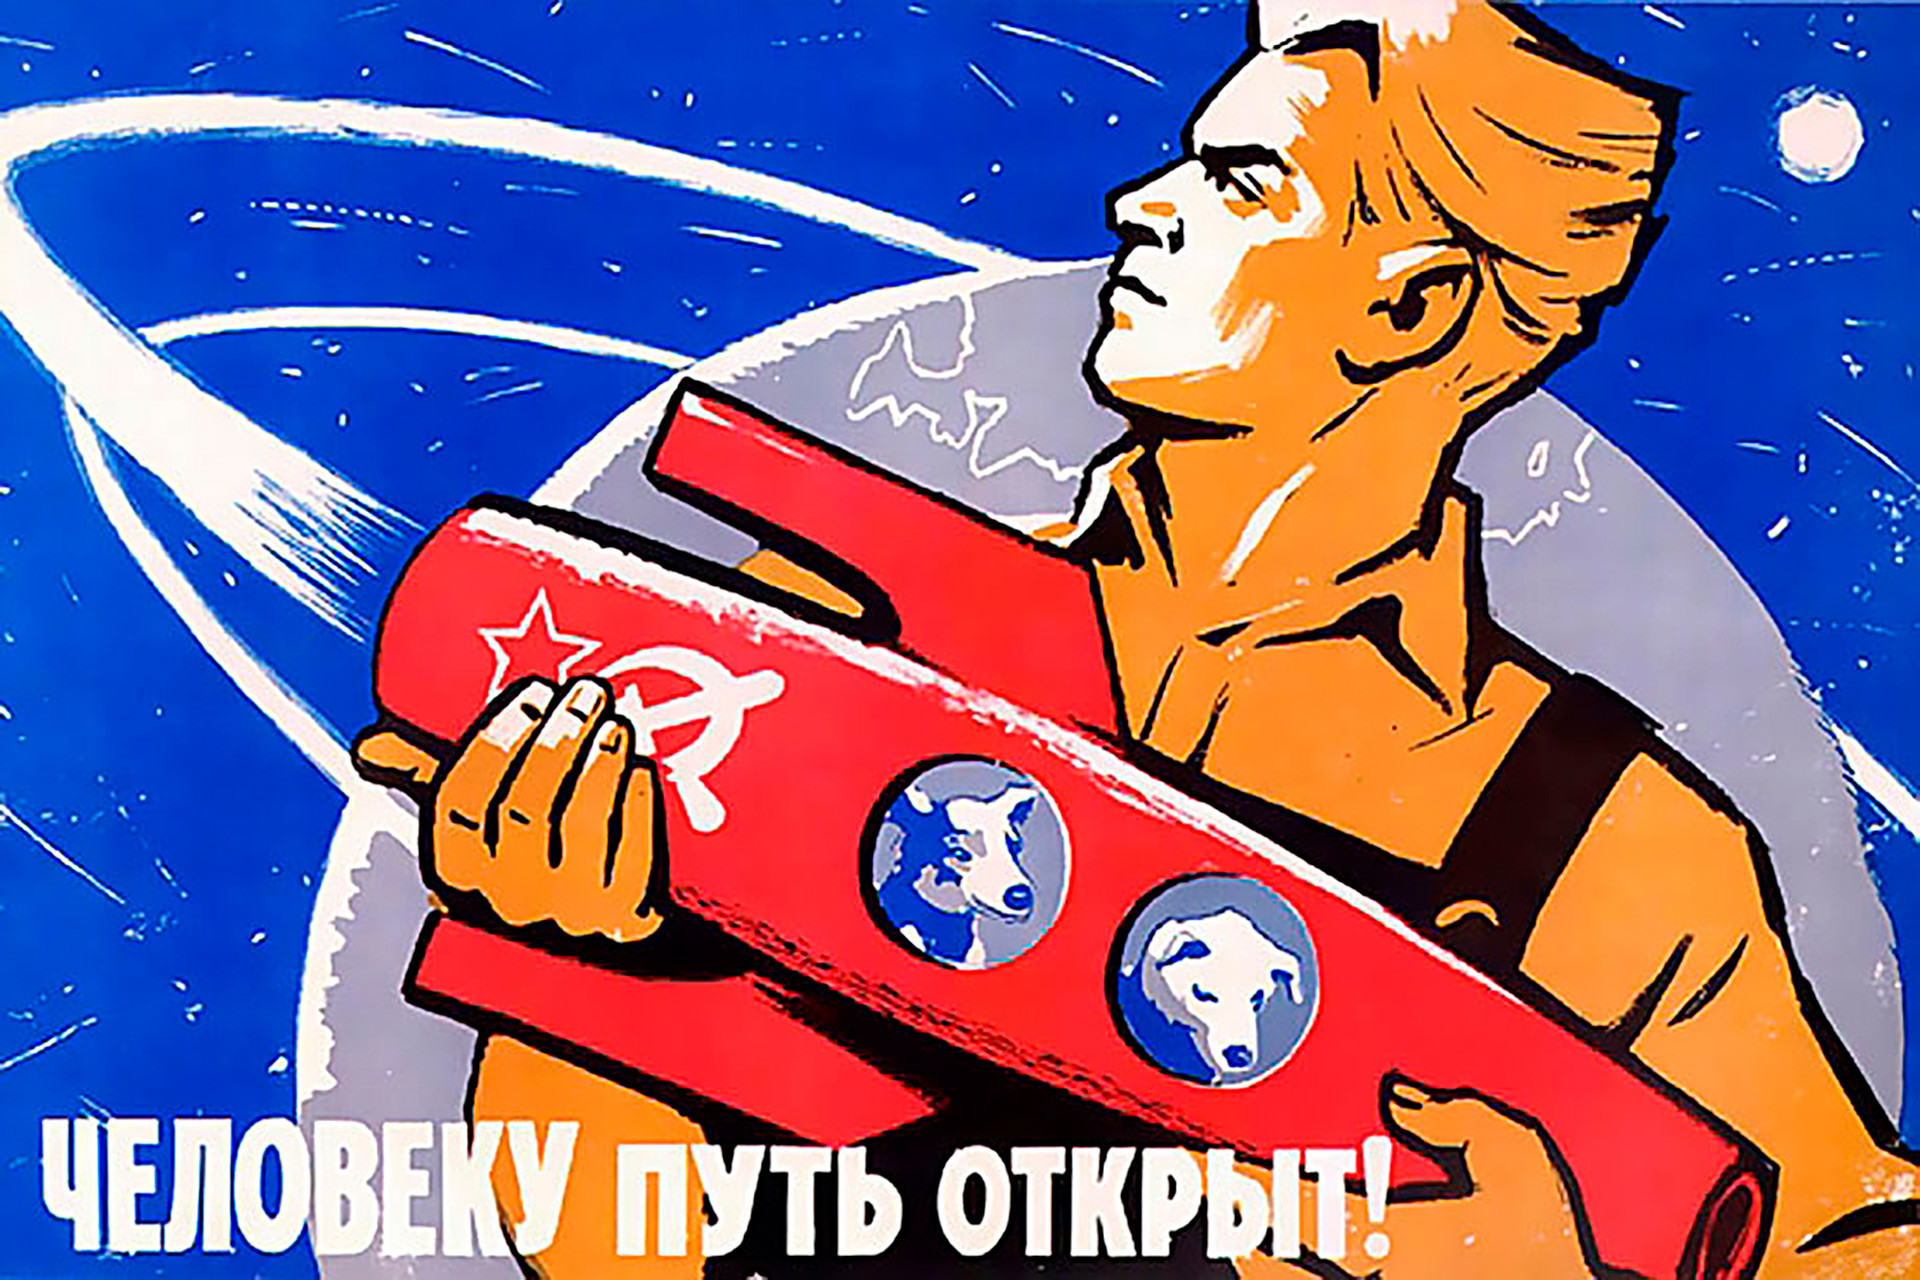 How Did Posters Make People Proud Of Soviet Success In Space